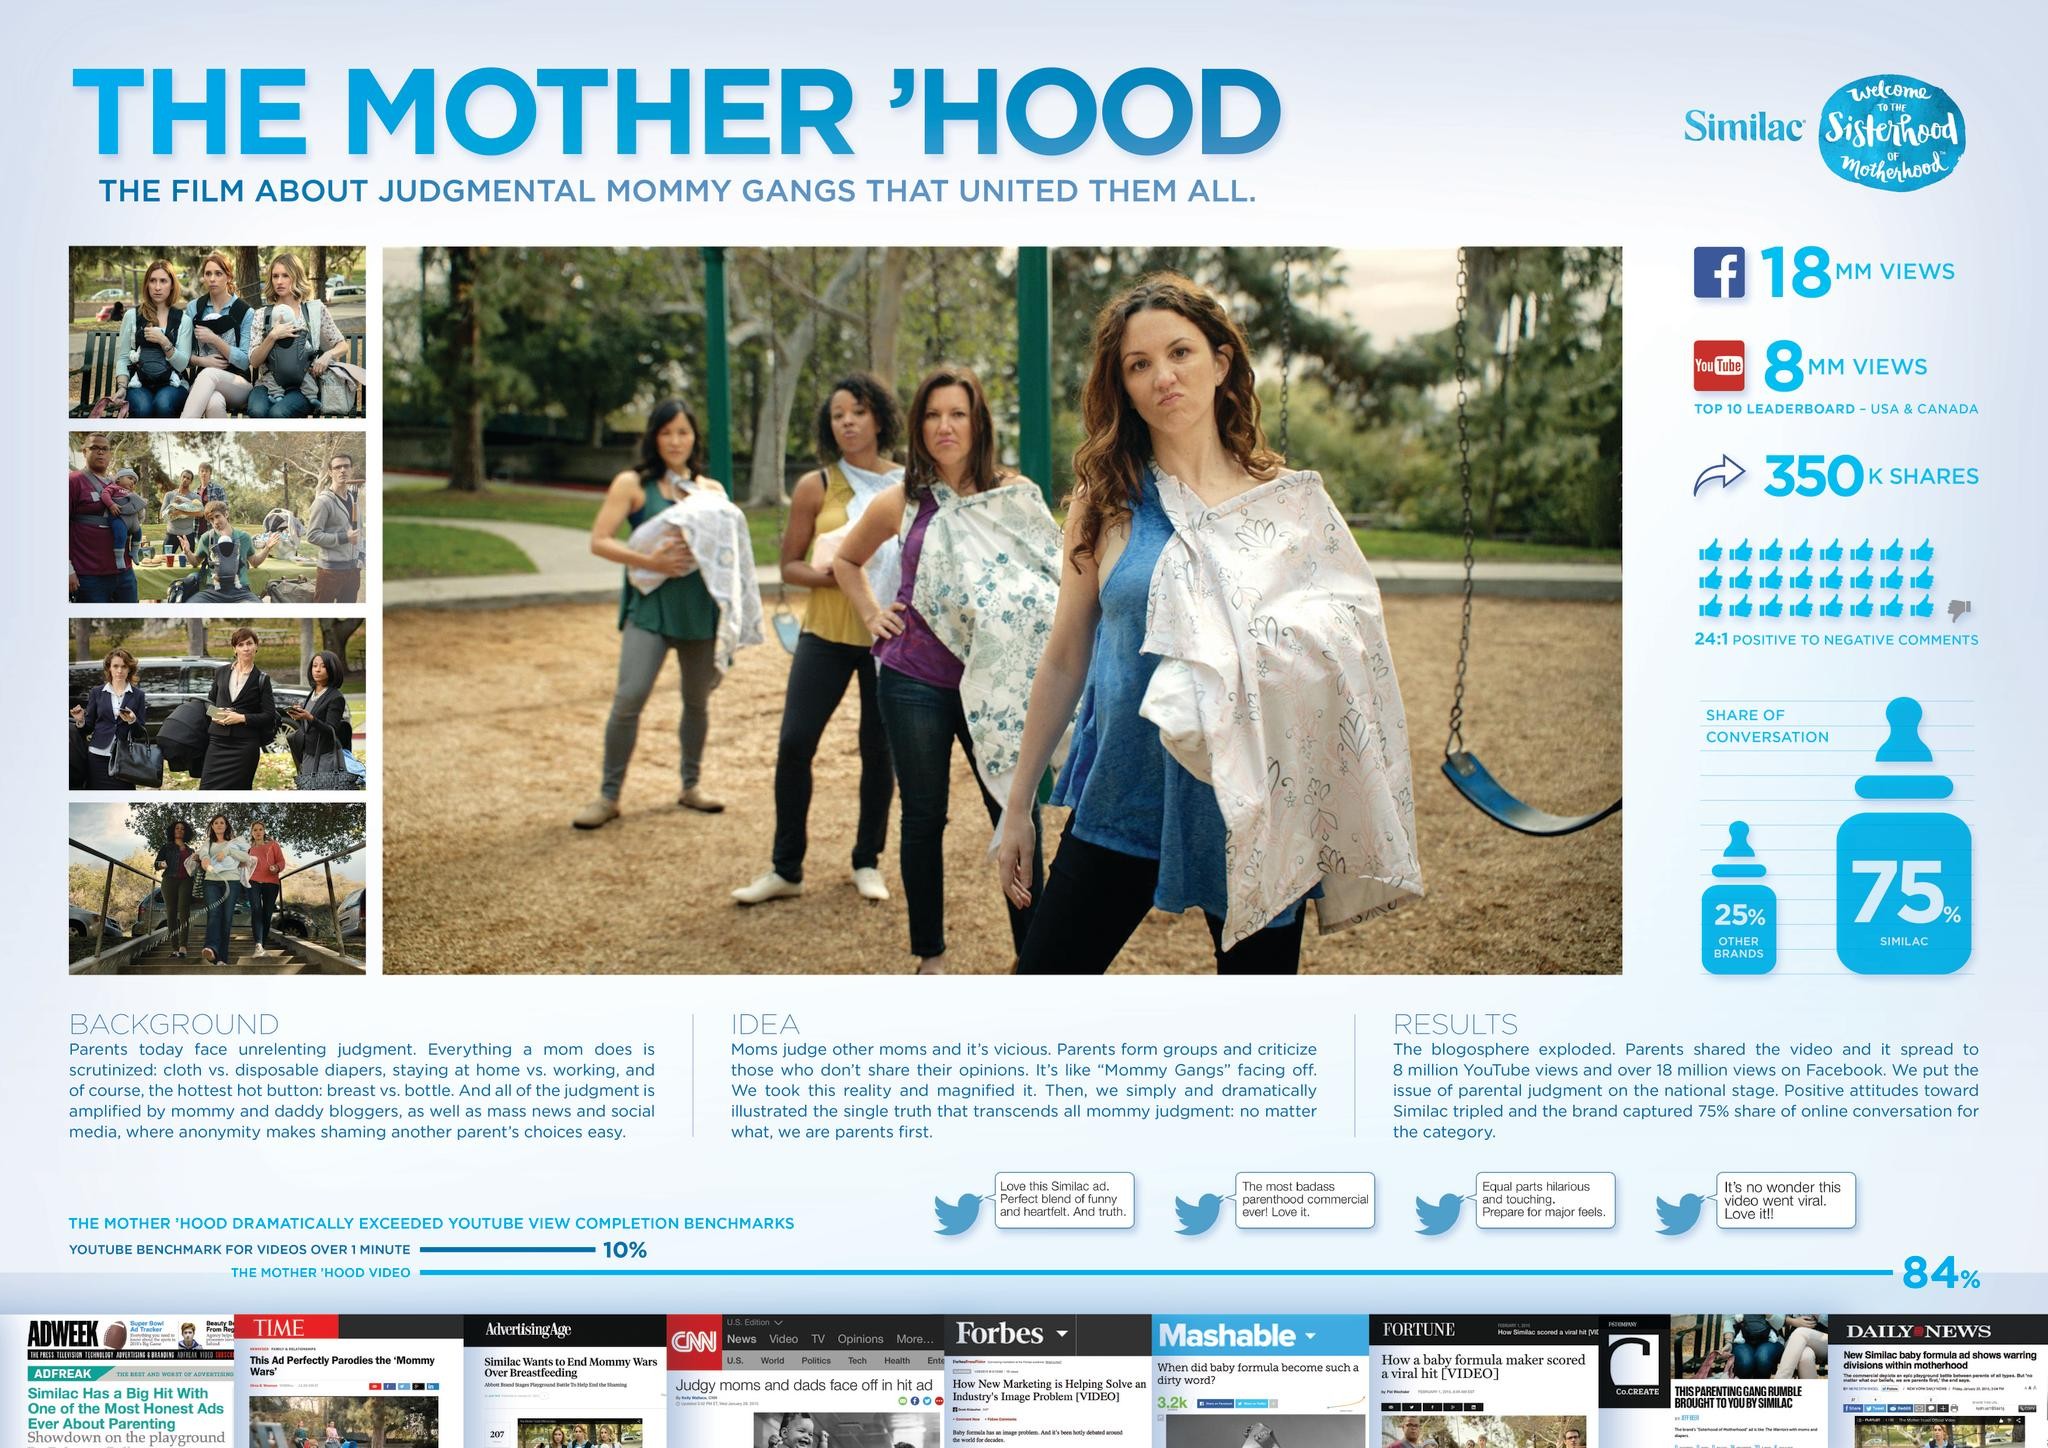 THE MOTHER 'HOOD